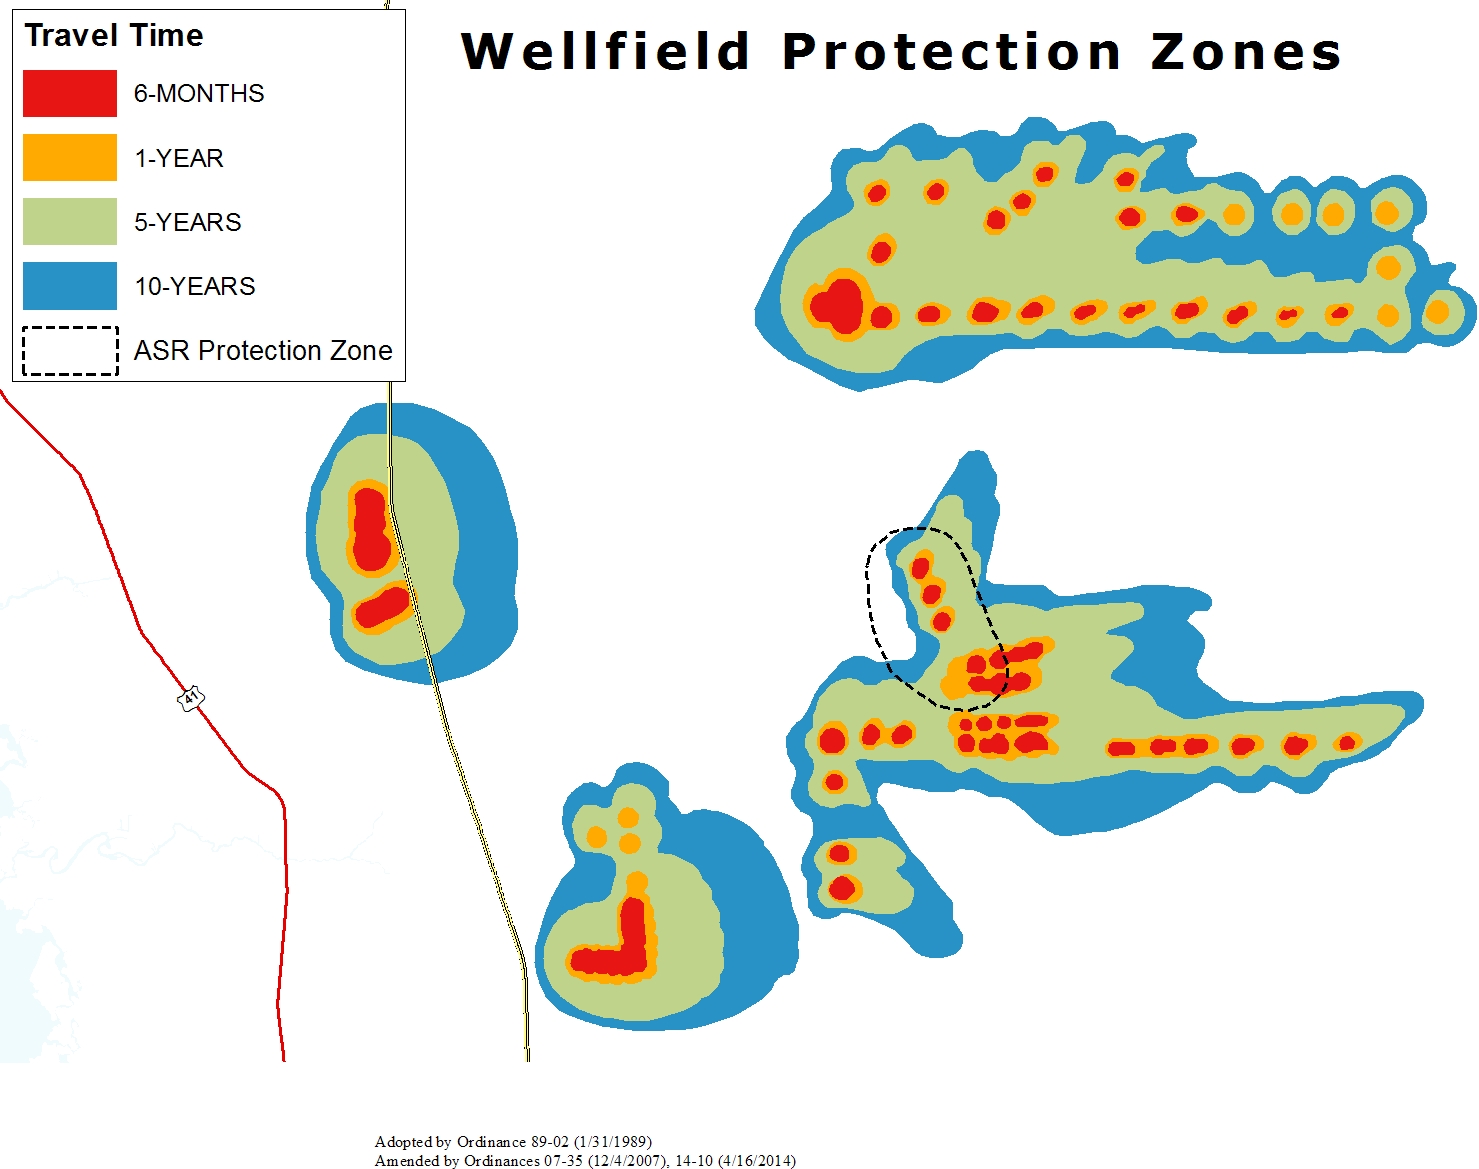 View Wellfield Protection Zones Map